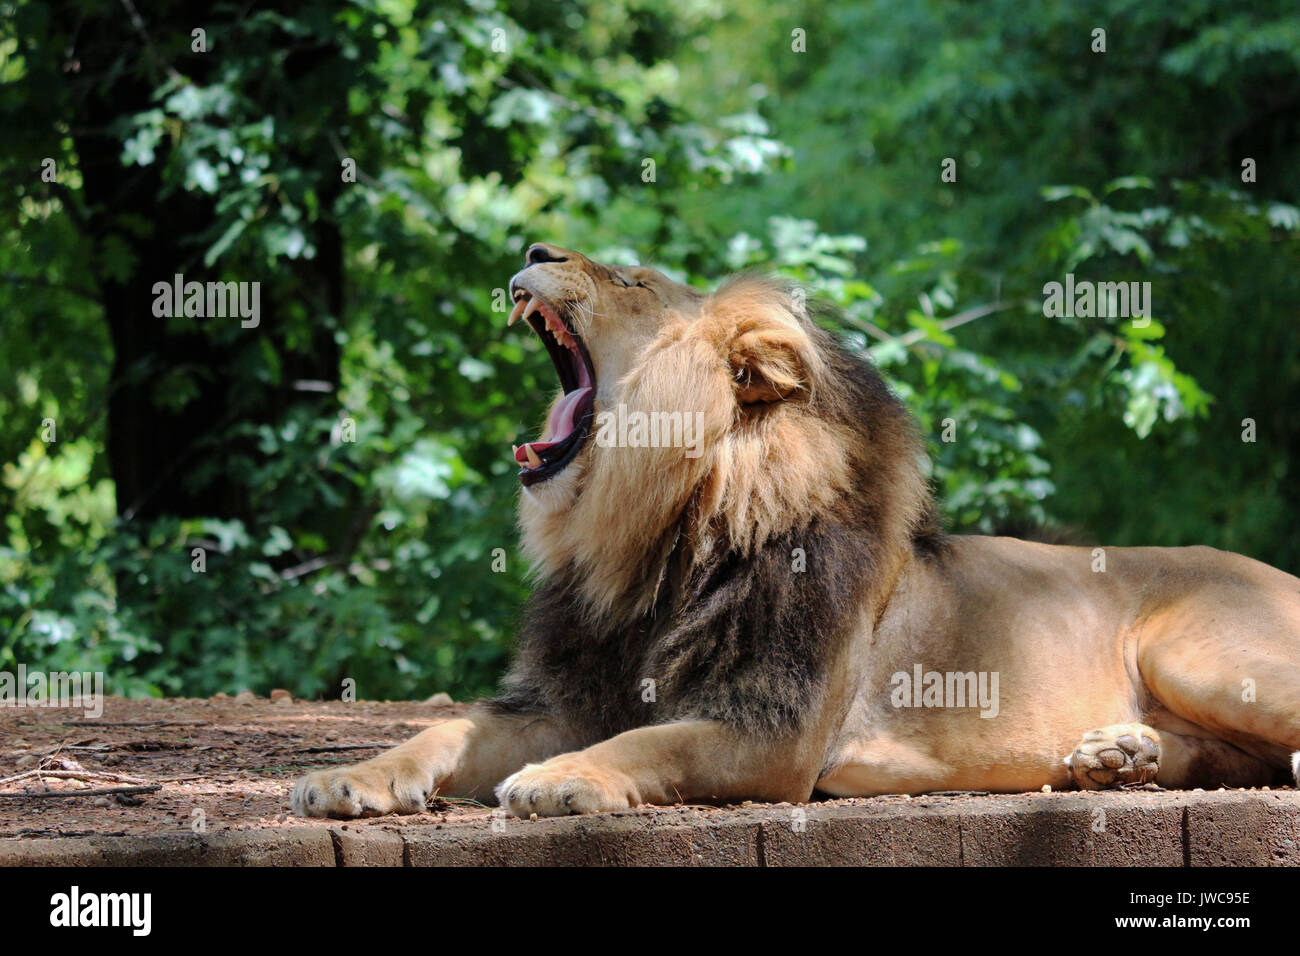 A Lion Relaxing in his Habitat with A Leafy Green Background. Stock Photo